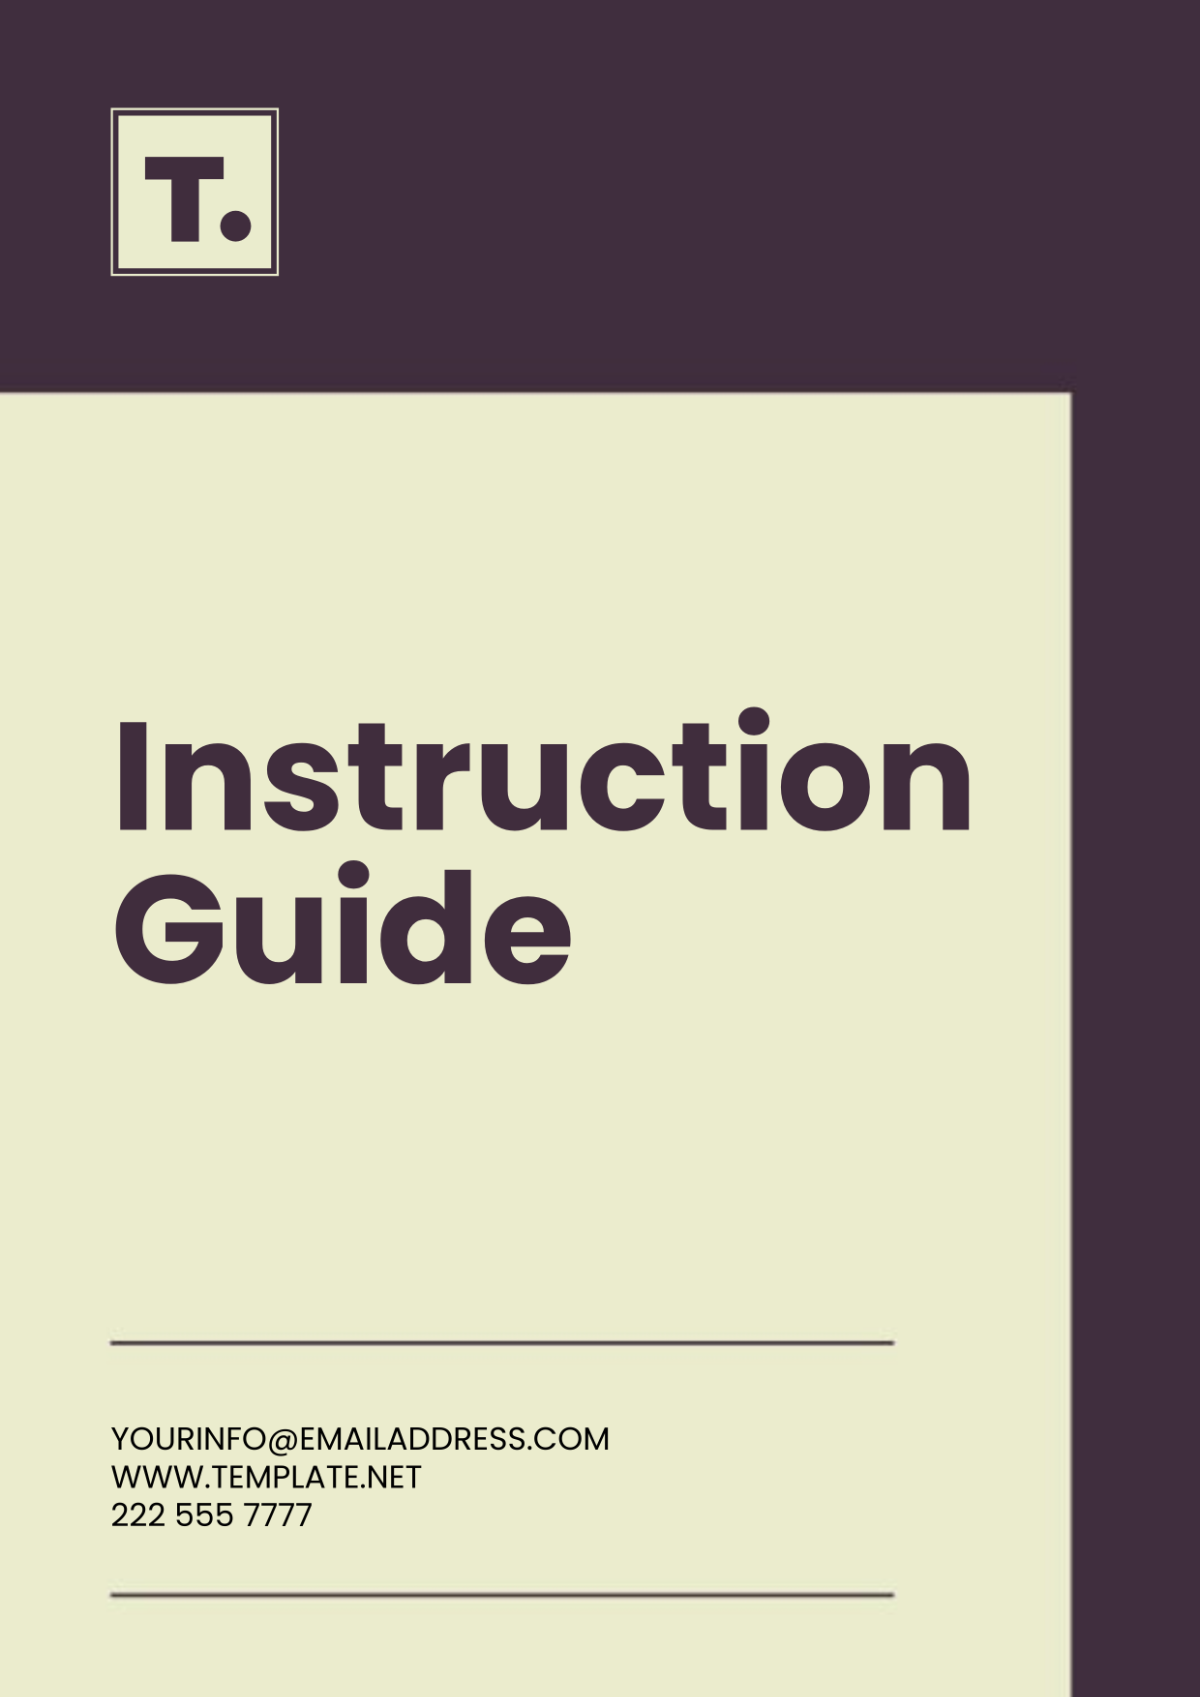 Free Instruction Guide Template